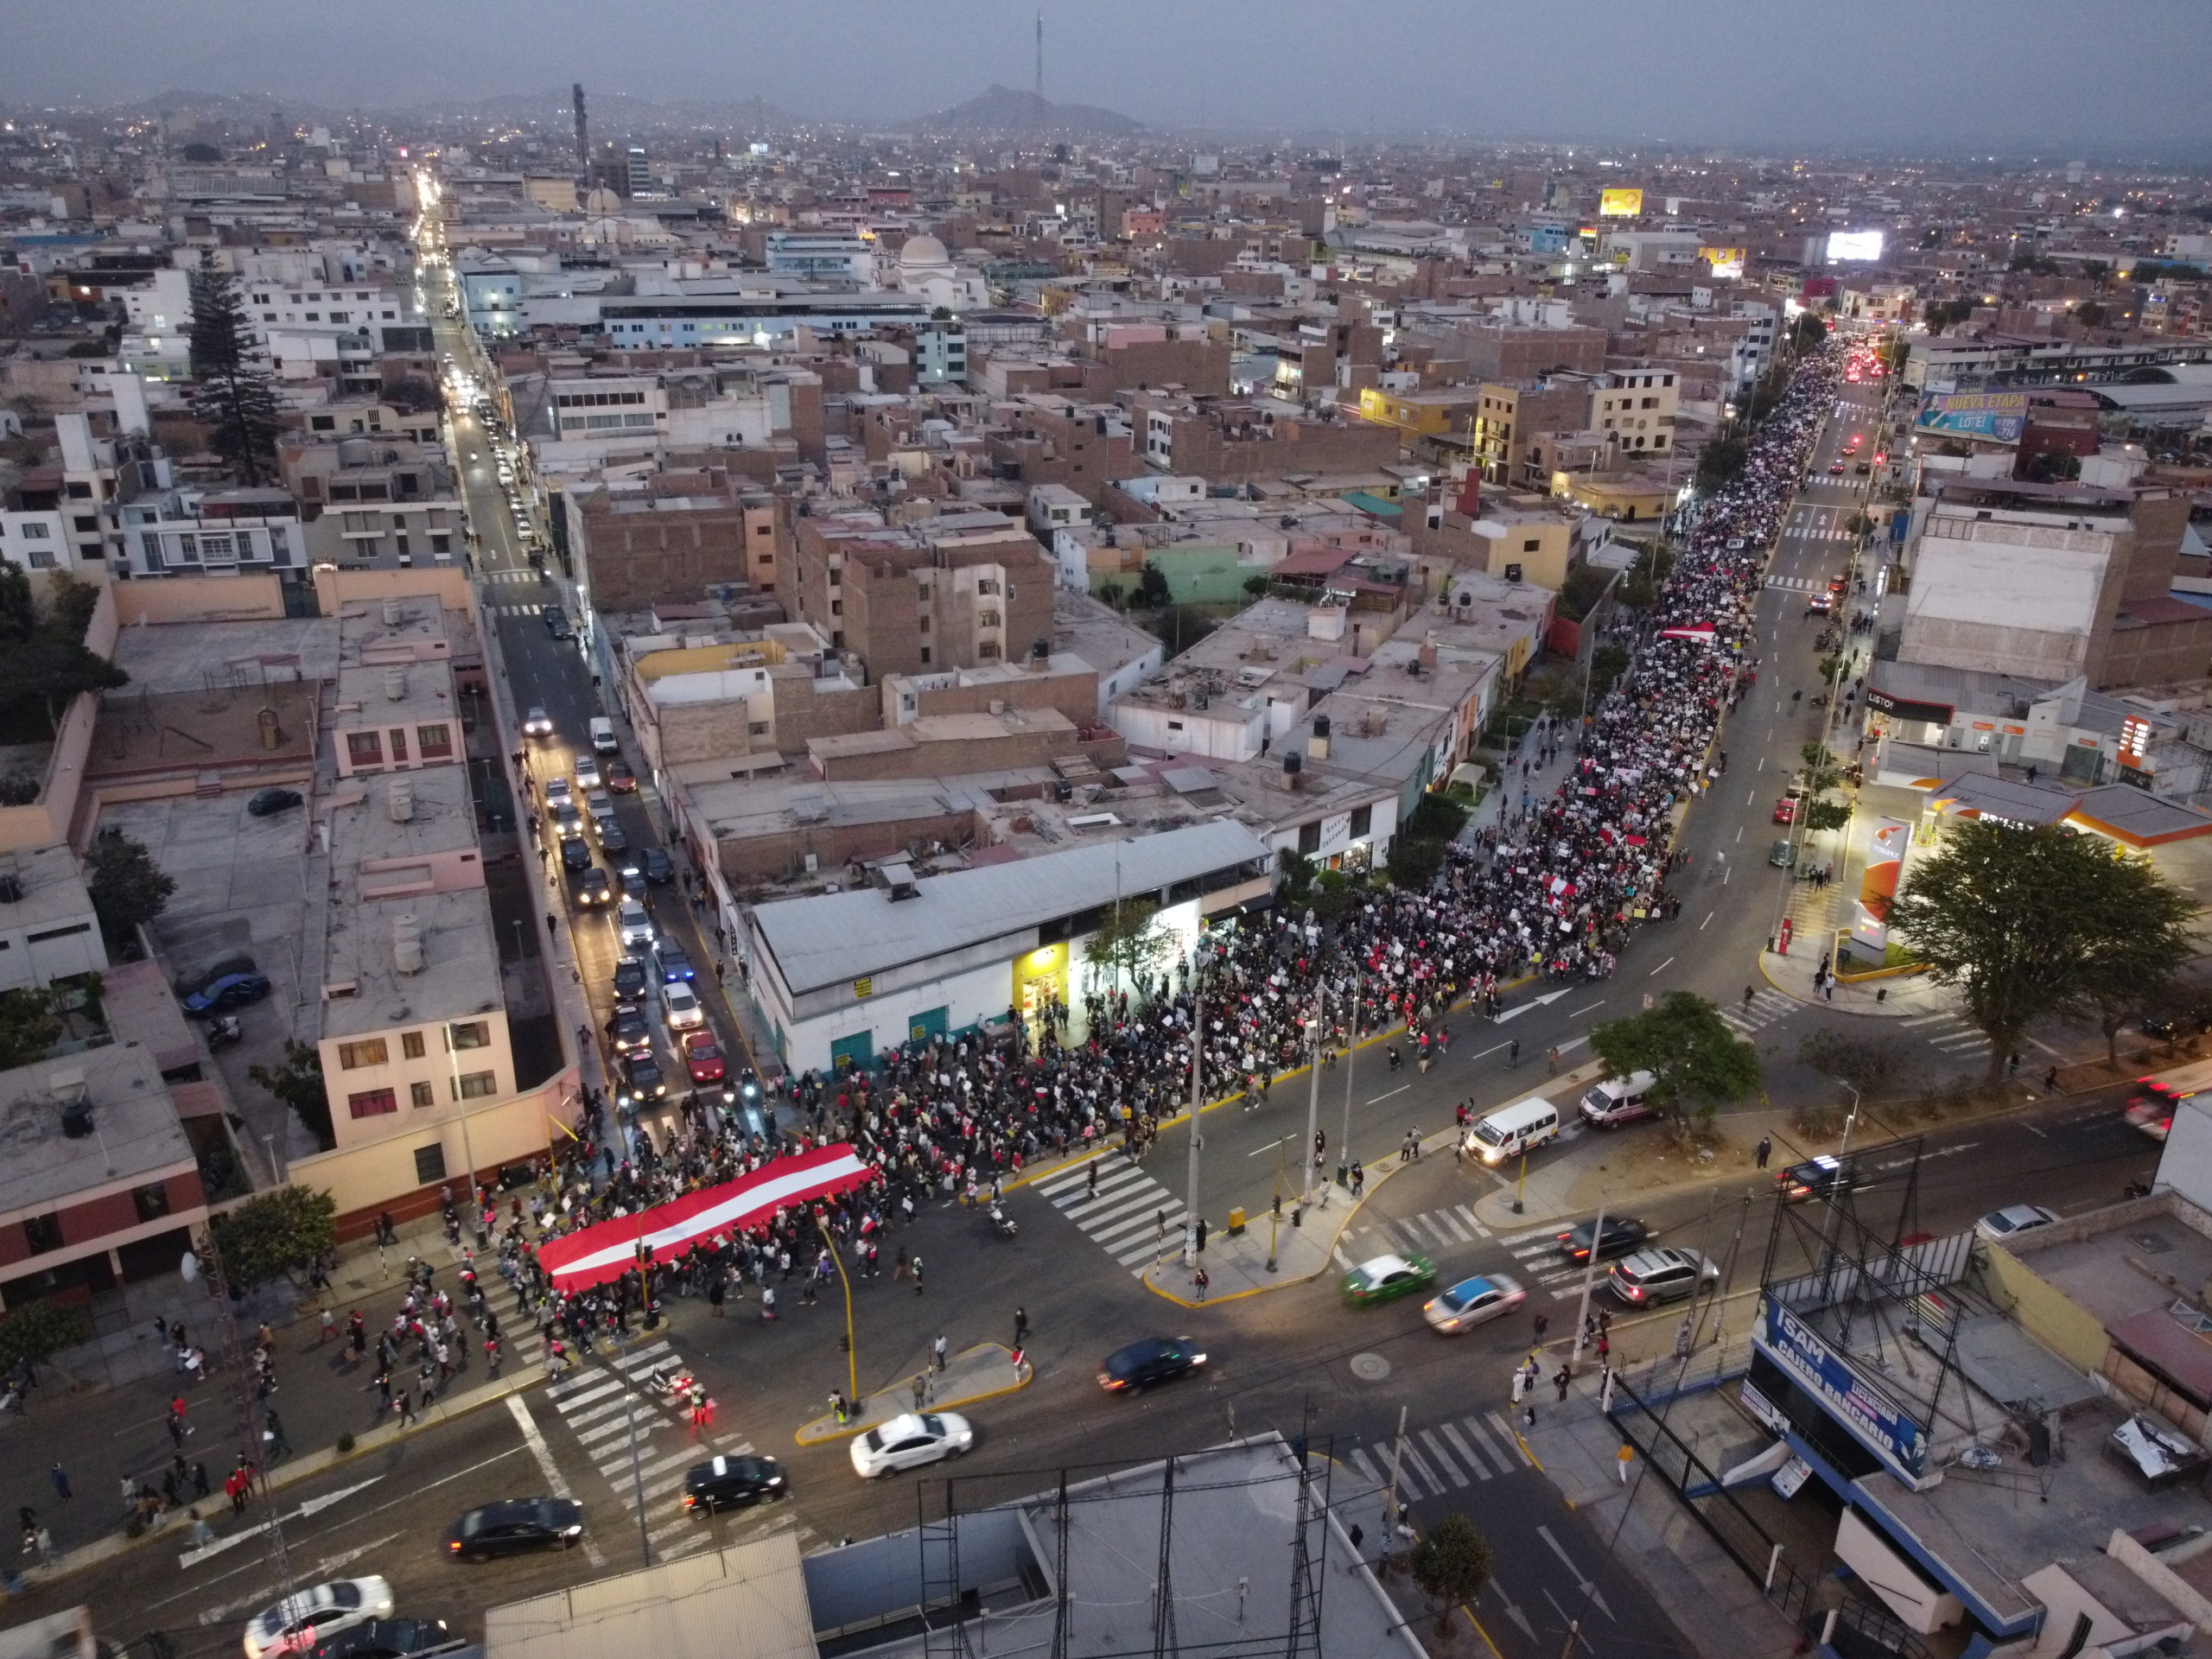 The people in Trujillo minutes after starting their march. The typical “protest route” last used by many women’s rights organizations on International Women’s Day leads to the main square. Photo: André Casana Rodríguez / @dre.mov